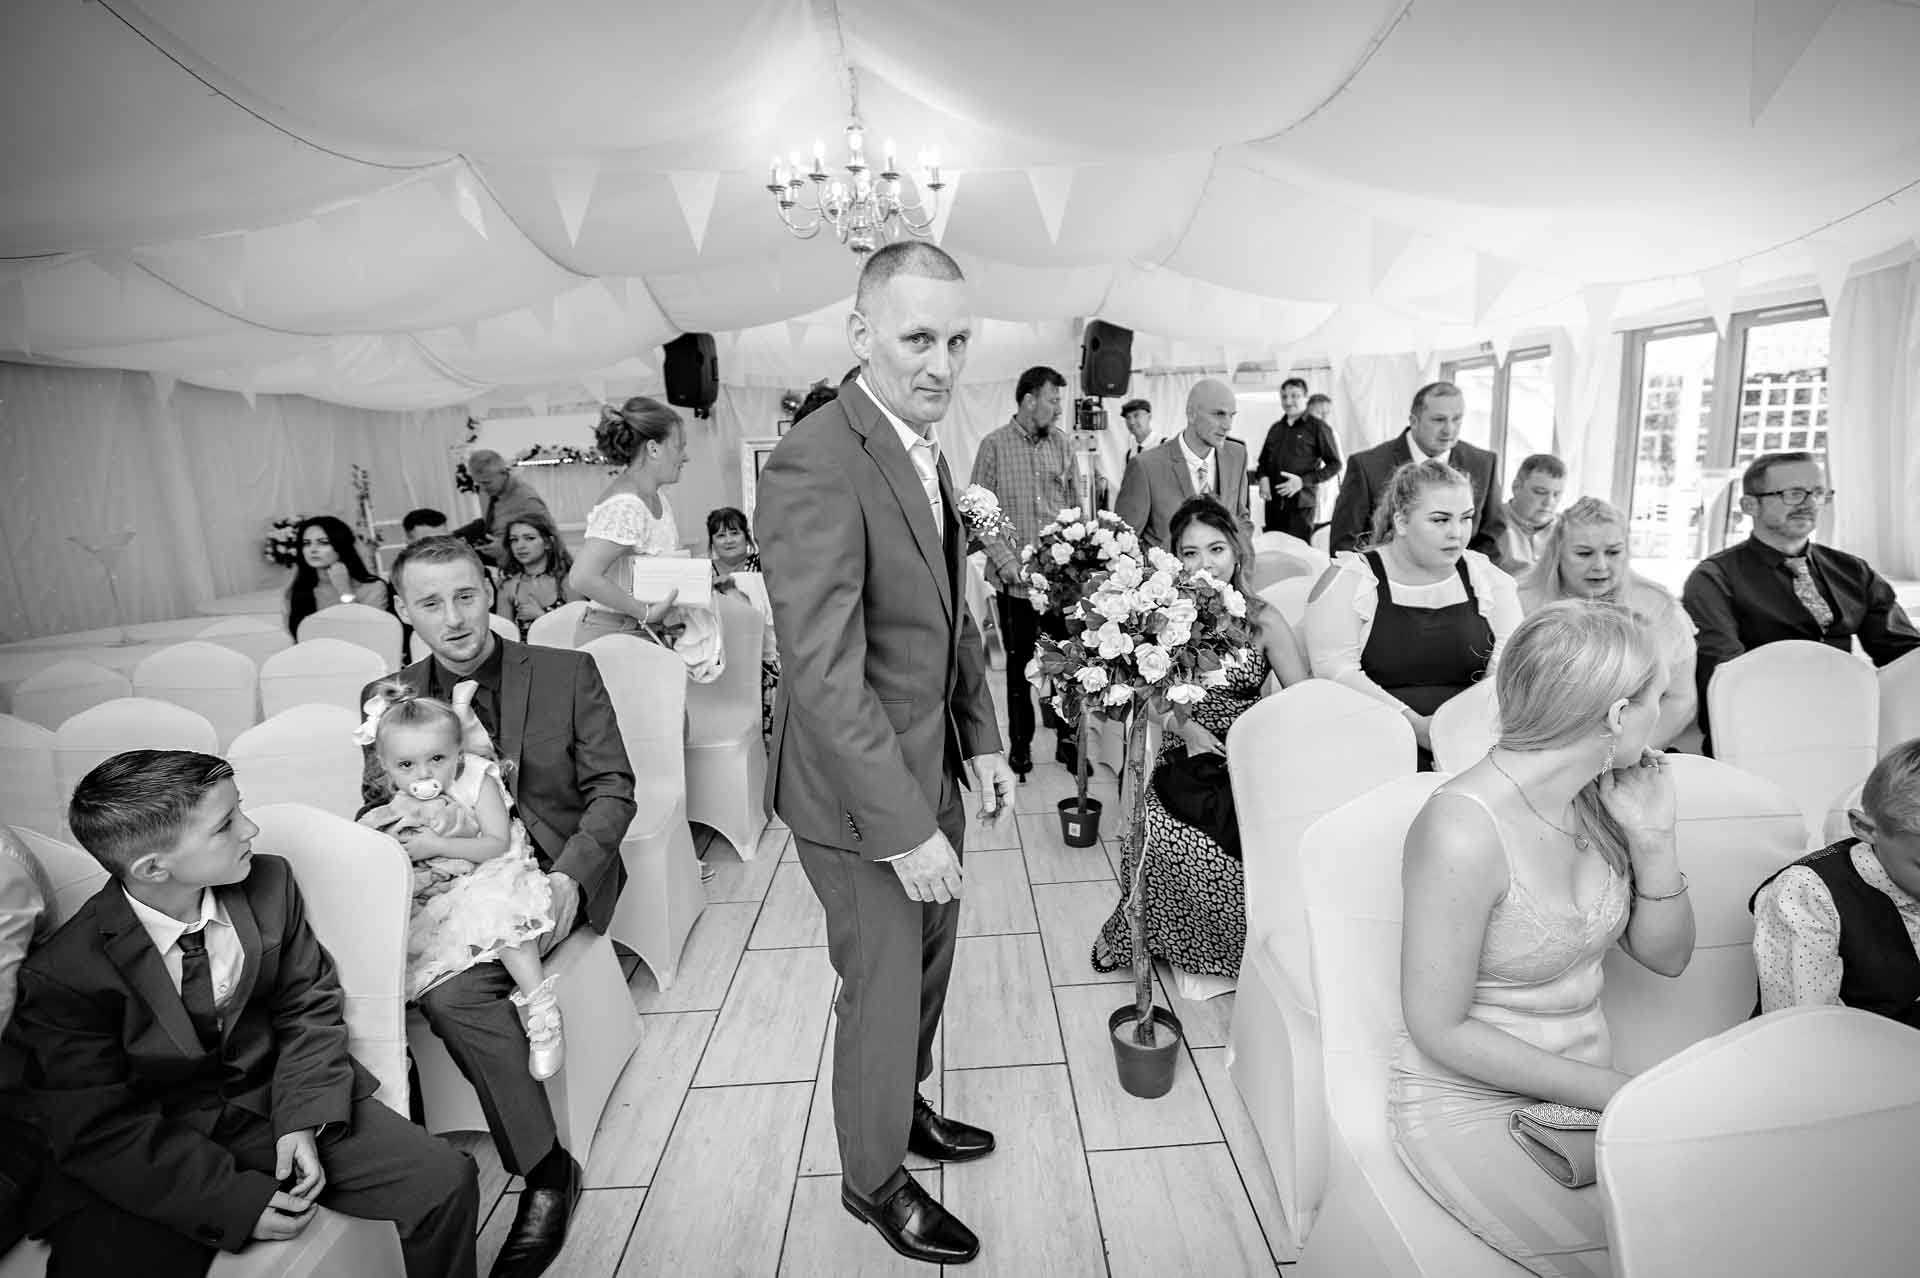 The groom stands nervously in the centre of the Marquee at the Ridgeway Golf Club in Caerphilly